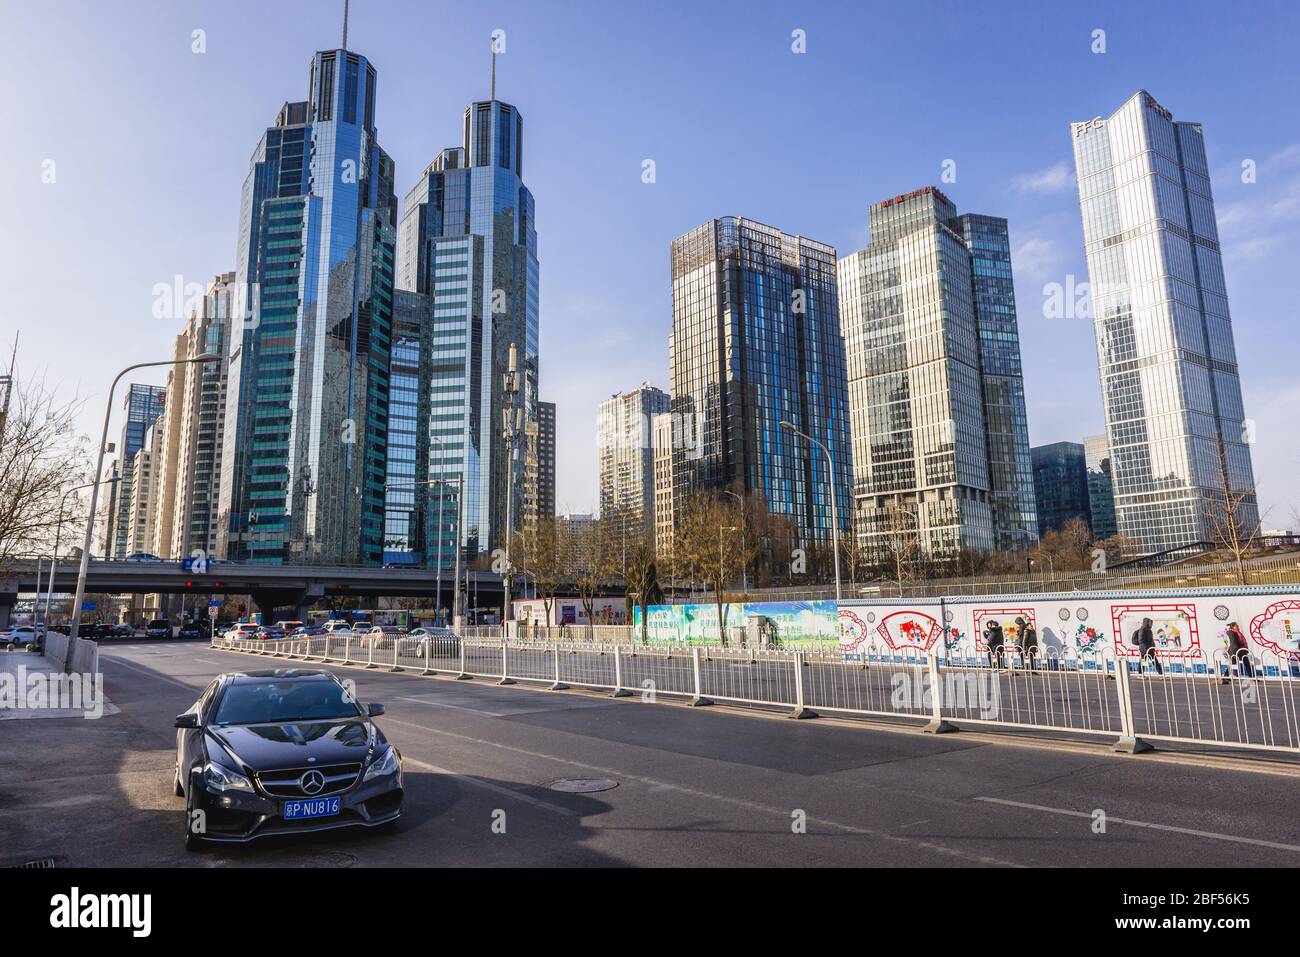 Beijing central business district, part of Chaoyang District in Beijing, China, view with Beijing Kerry Centre and Fortune Plaza buildings Stock Photo